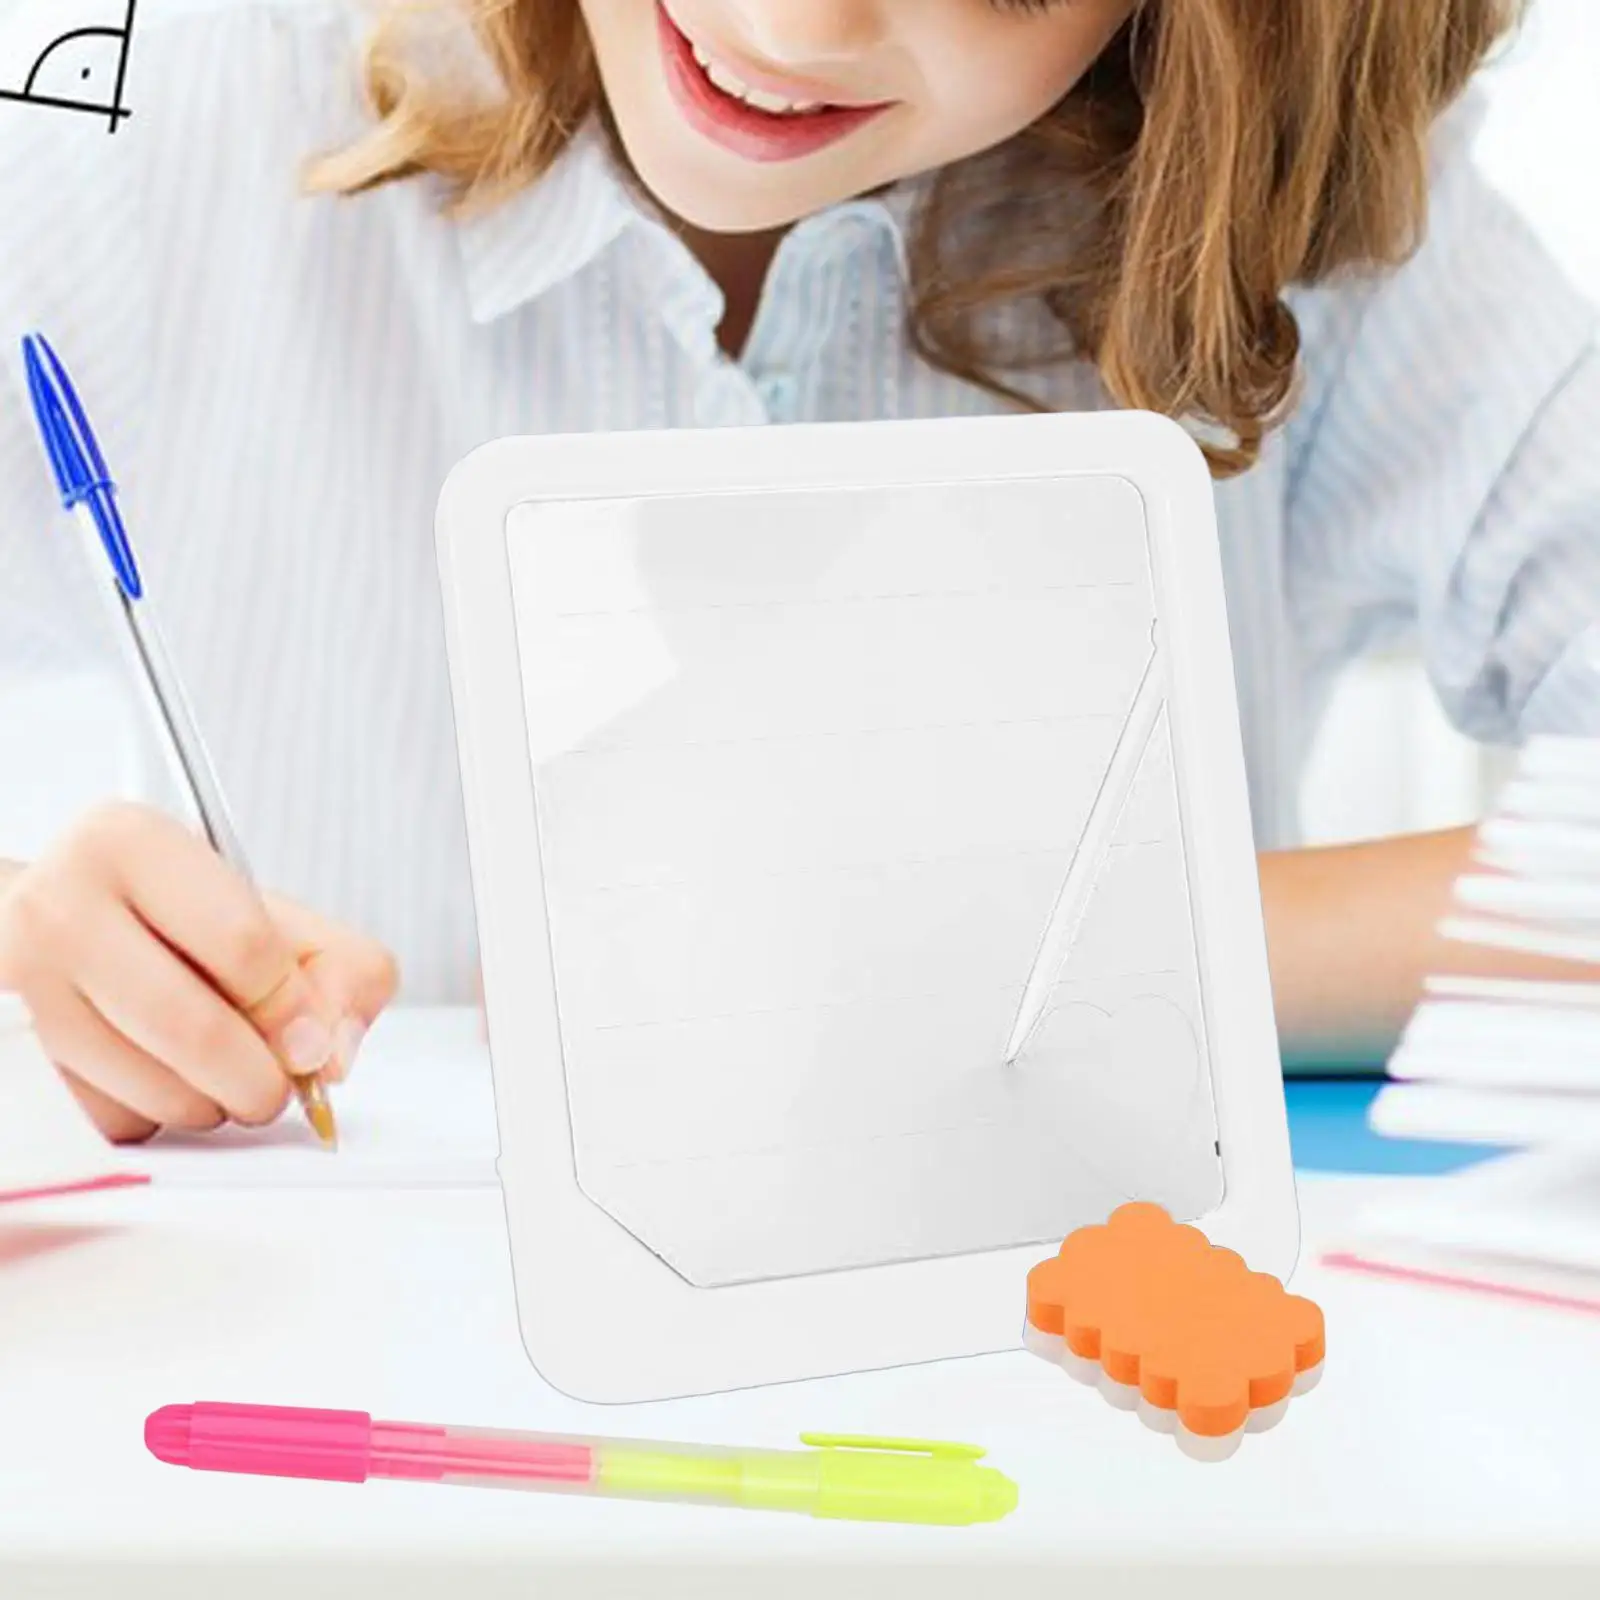 Writing Board Light up Drawing Board Science and Educational Toys Handwriting Child Sensory Educational Toy for Students Kids